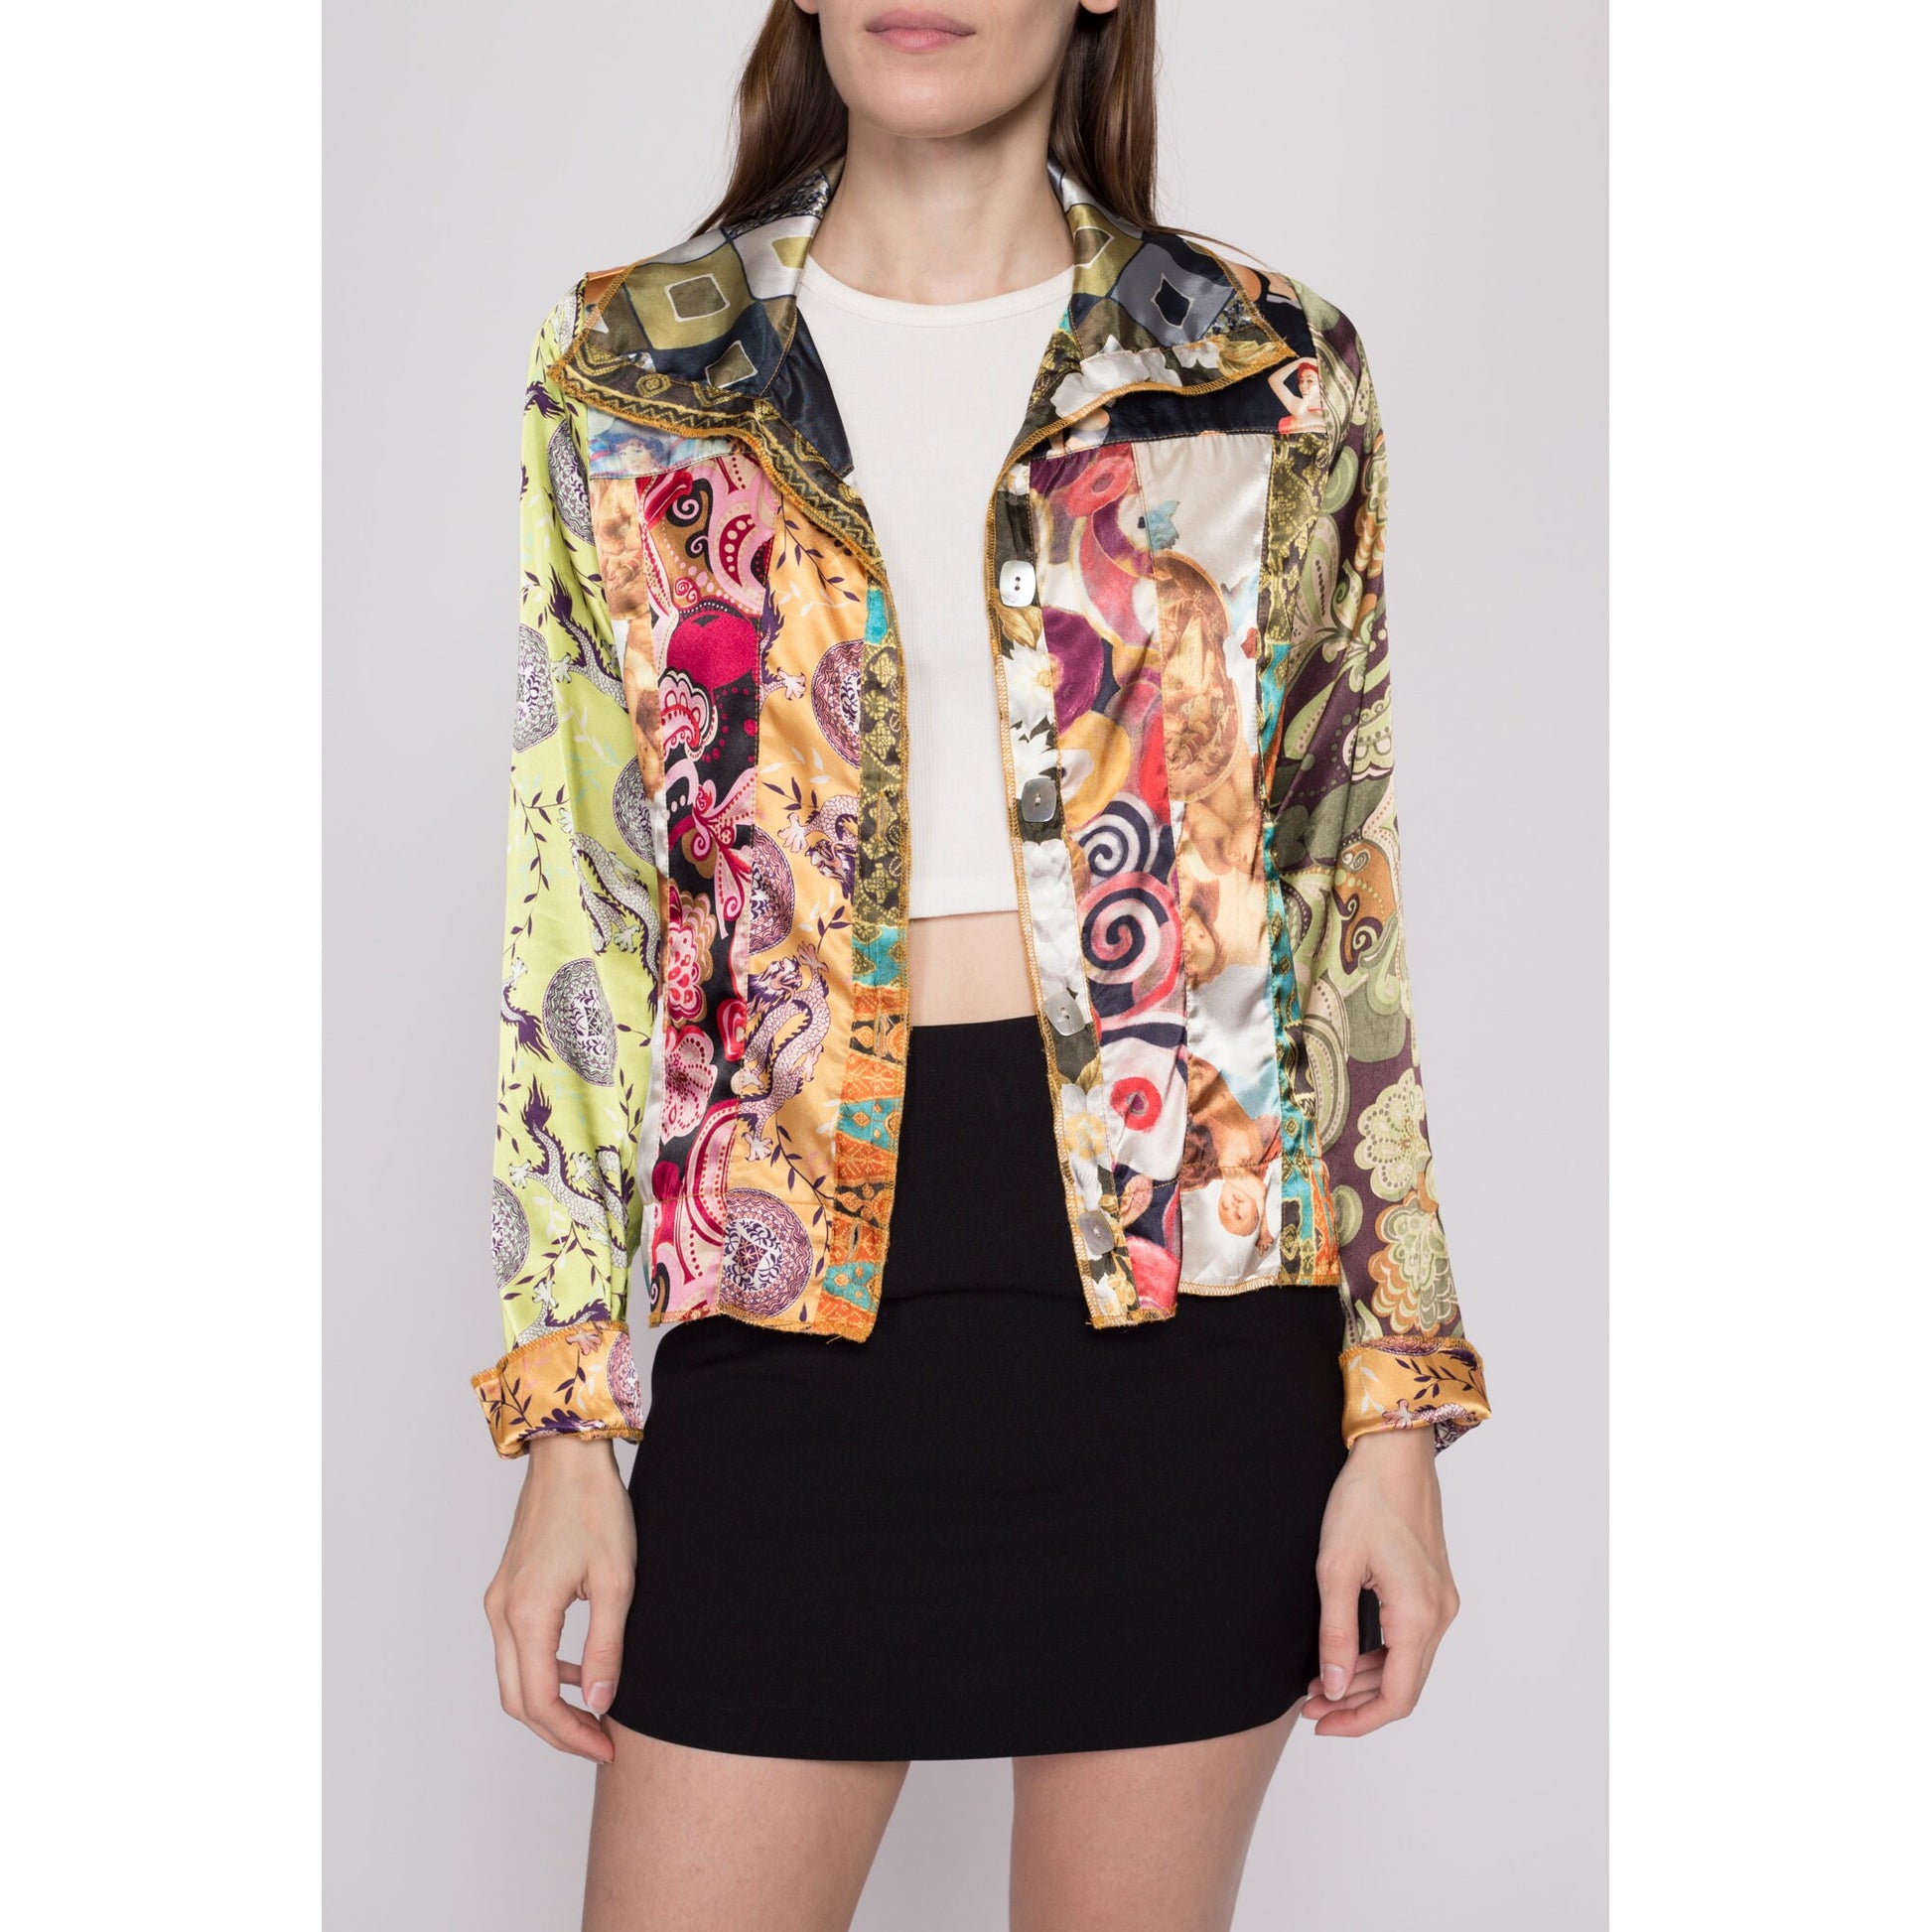 Medium 90s Baroque Patchwork Satin Cropped Jacket | Boho Collared Abalone Button Up Top